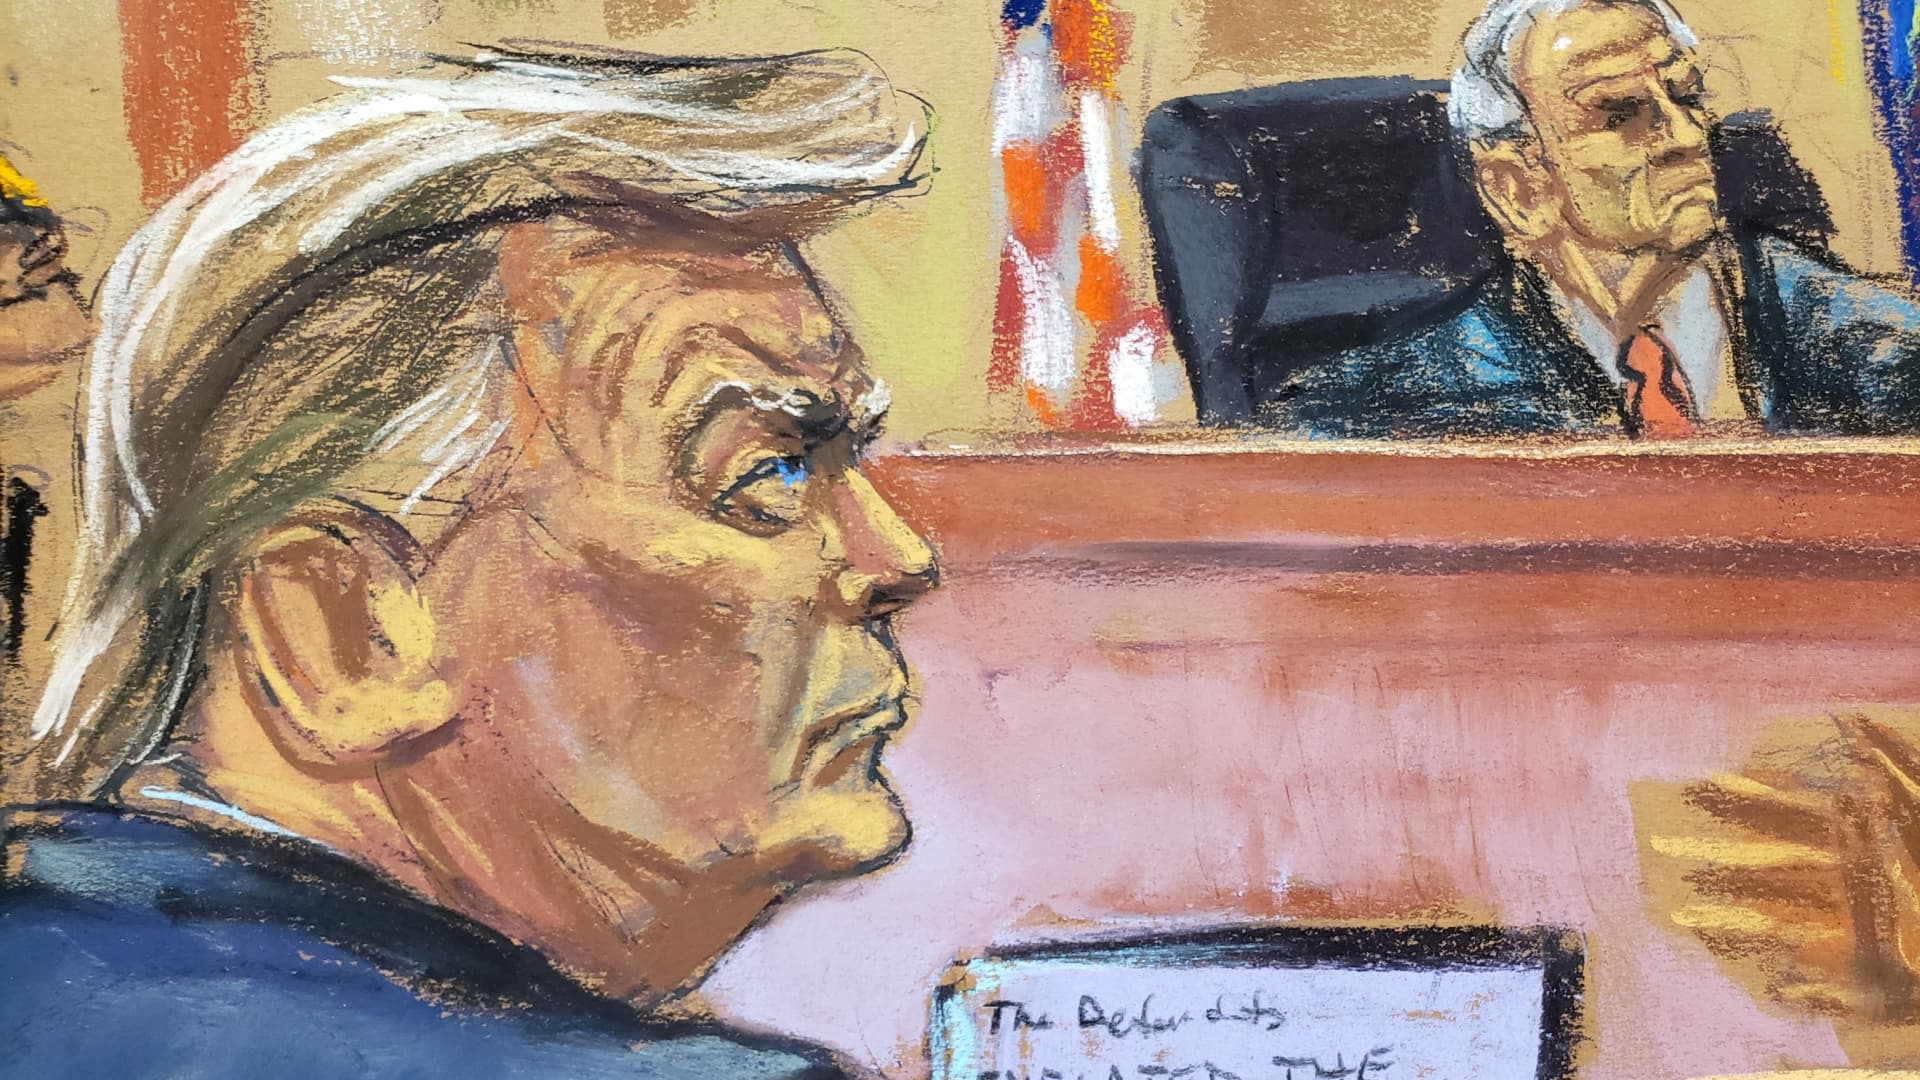 Former President Donald Trump and Judge Arthur Engoron of New York Supreme Court listen to opening arguments by Kevin Wallace (not seen), a lawyer in state Attorney General Letitia James' office, during the trial of Trump, his adult sons, the Trump Organization and others in a civil fraud case brought by James, at a Manhattan courthouse, in New York, Oct. 2, 2023, in this courtroom sketch.